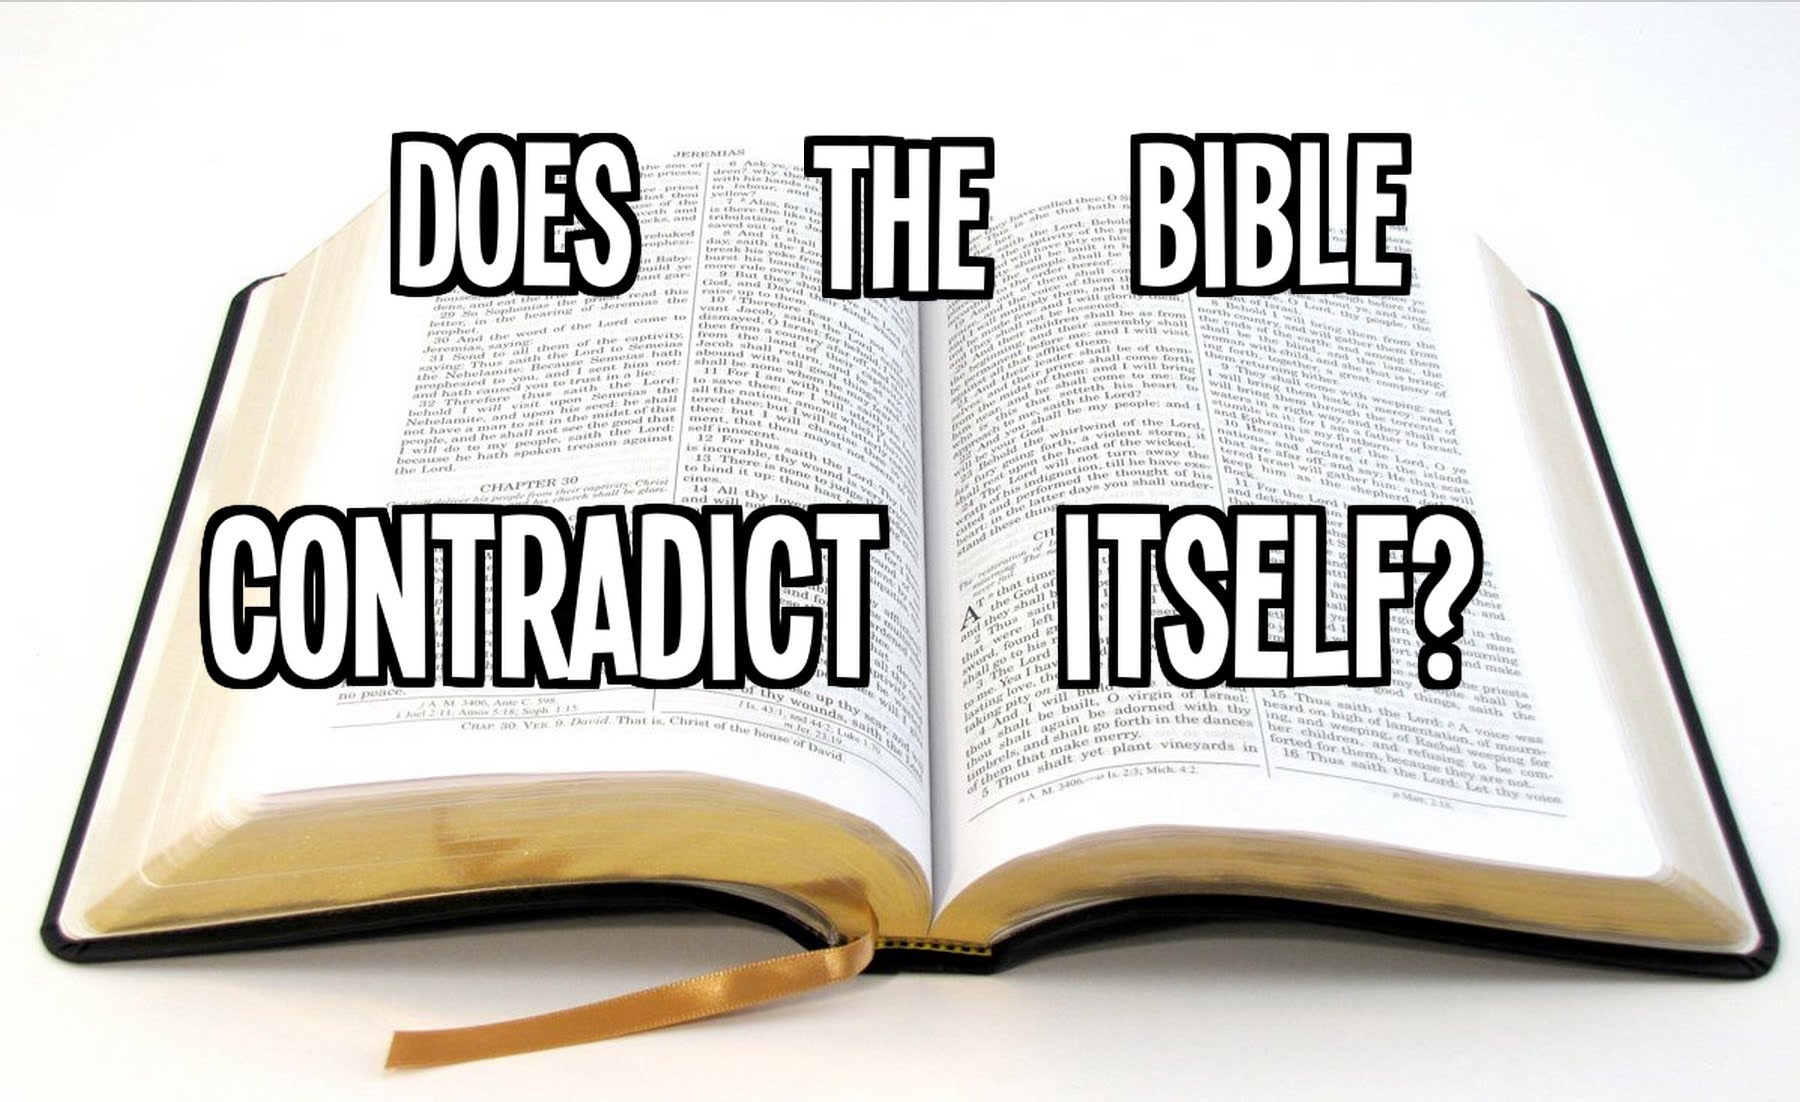 Are there contradictions in the Bible?